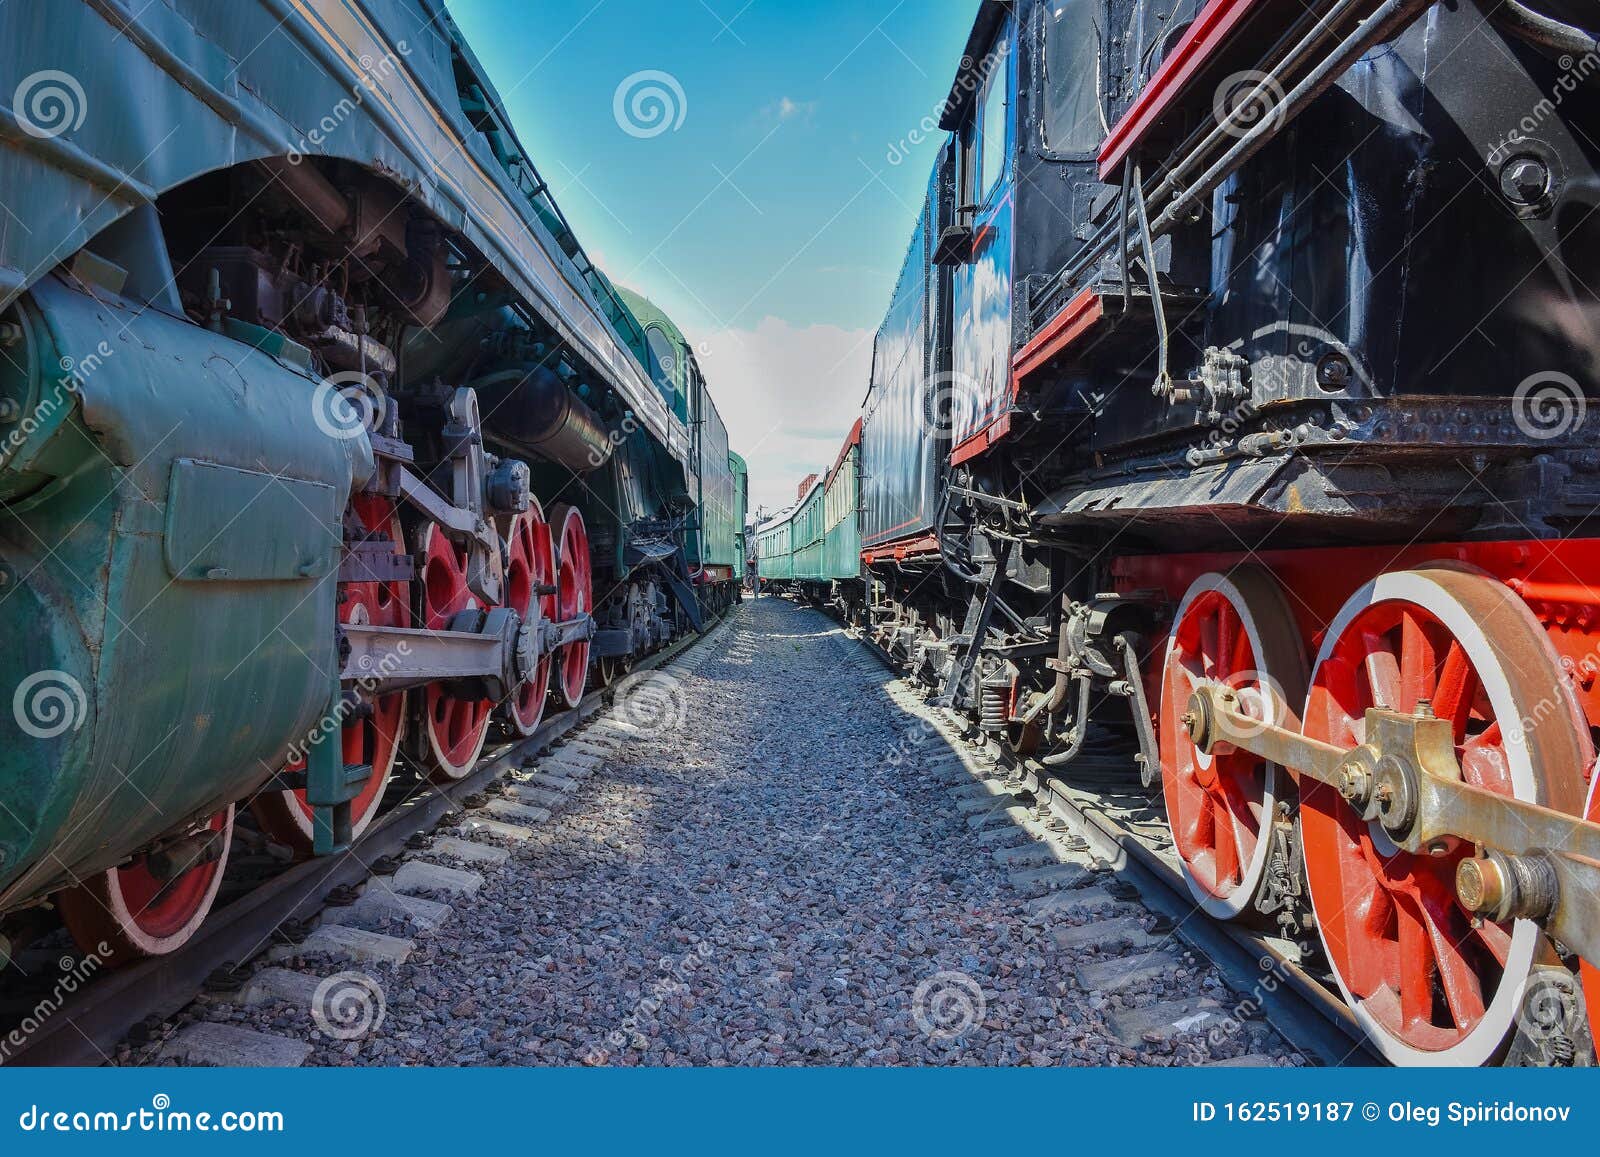 between wagons of old trains, between two old trains, red metal train wheels